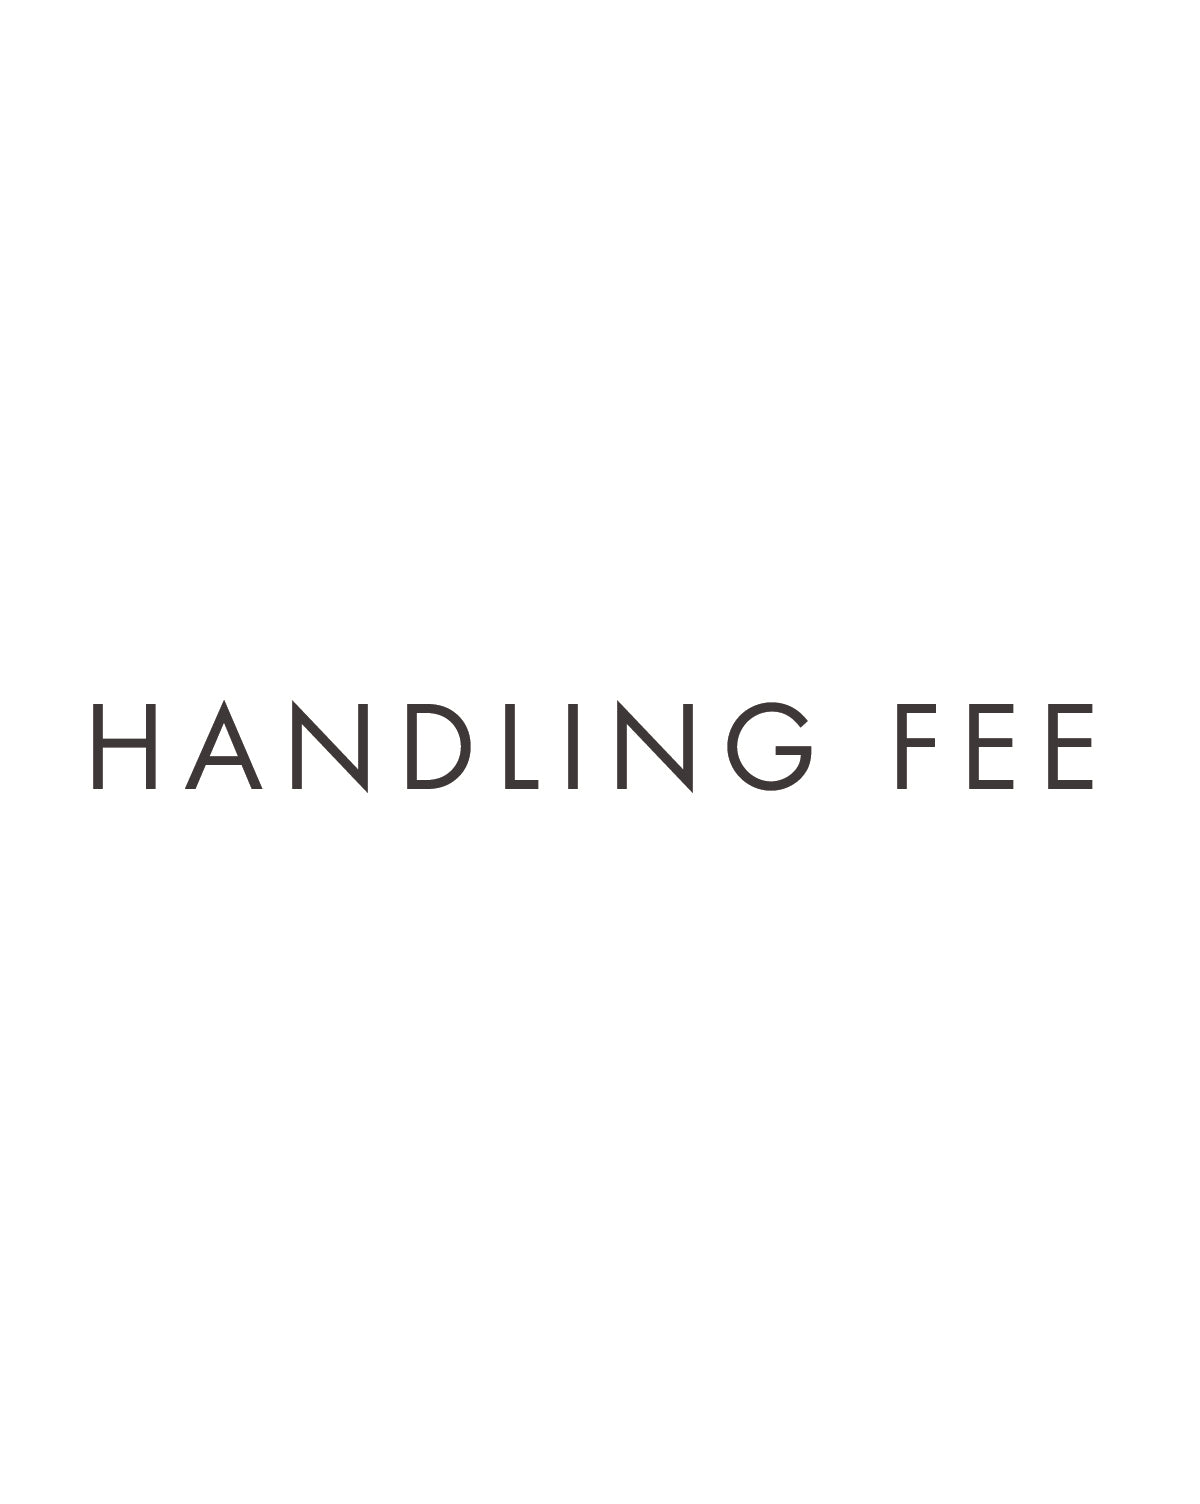 McGee & Co., Handling Fee for "Zadock Outdoor End Table"